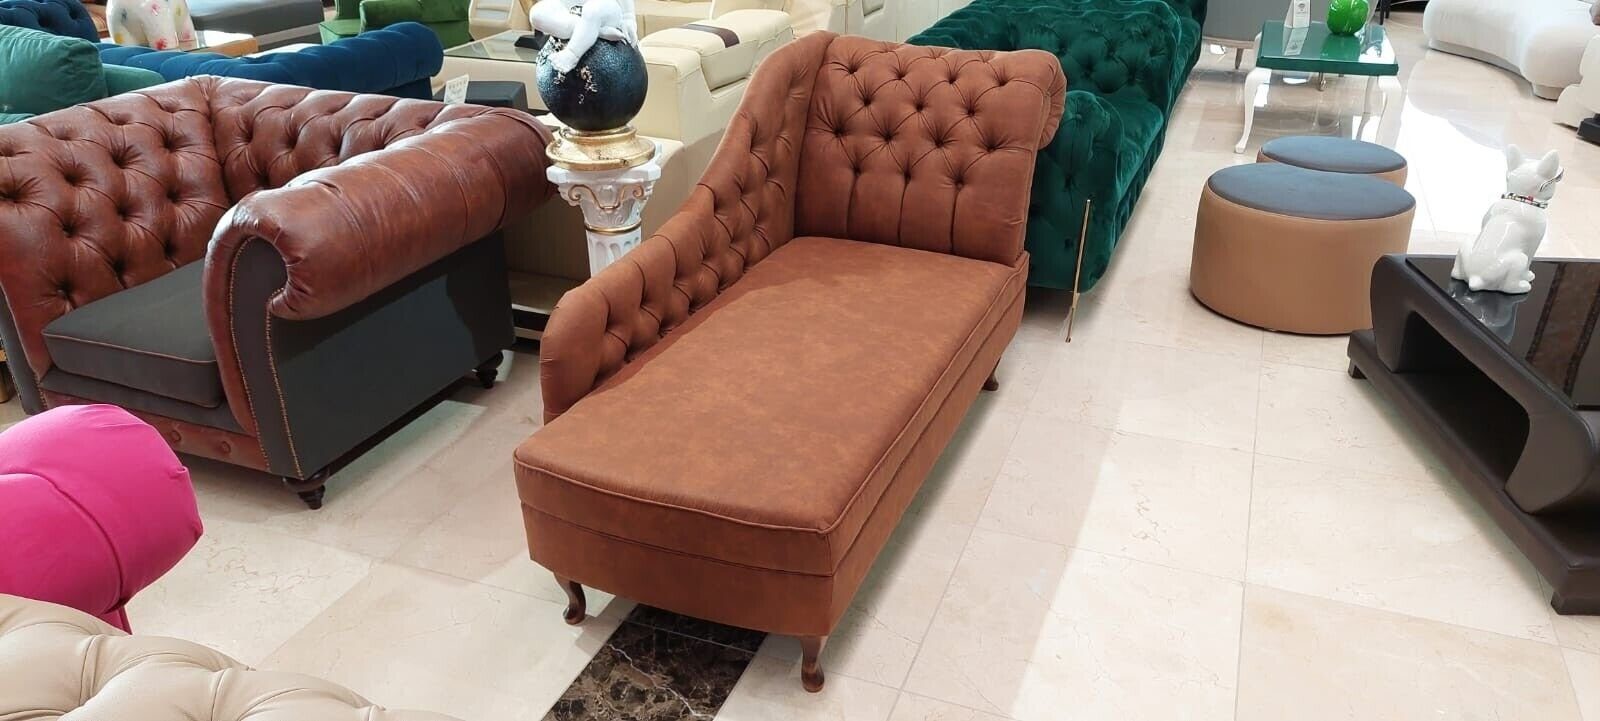 mane Chesterfield Chaiselongues Polster Europe Chaiselongue Made Sofort, Liege JVmoebel Chaise in